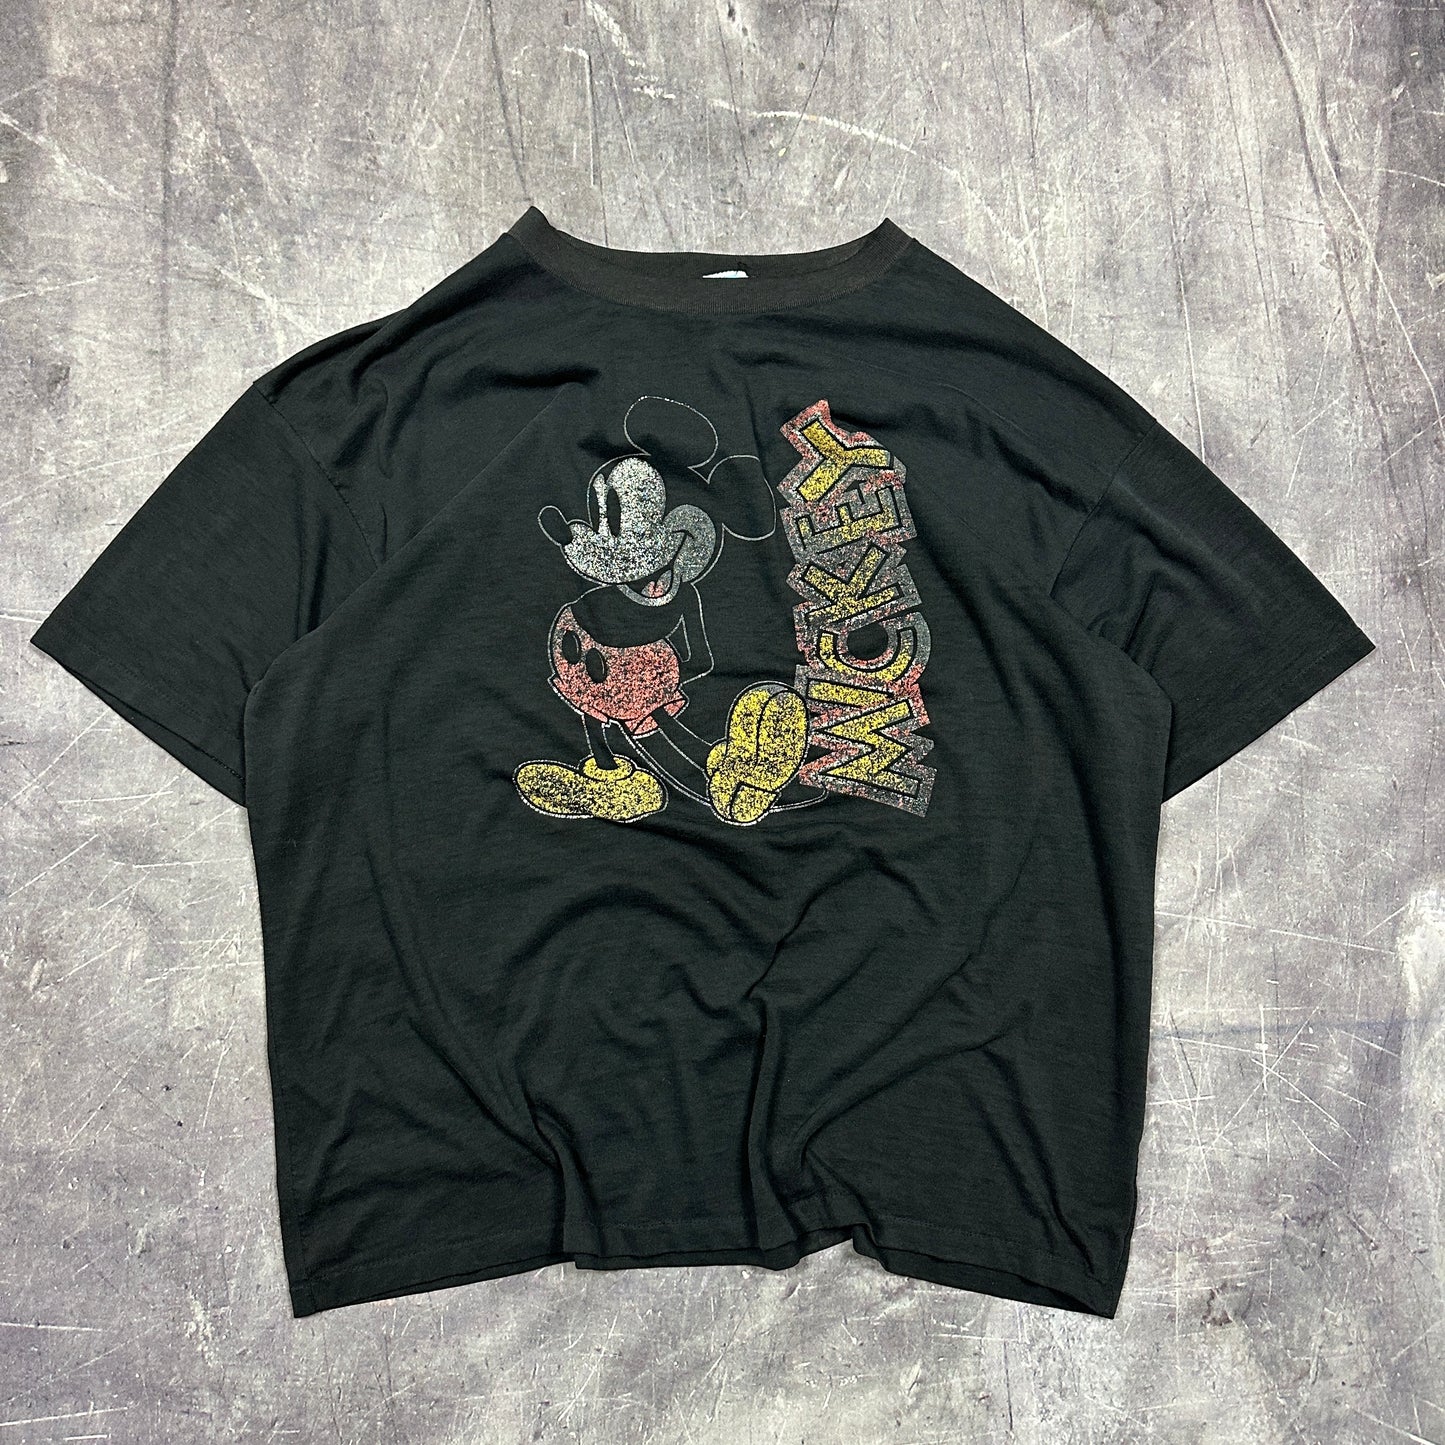 90s Faded Black Mickey Mouse Graphic Shirt XL A87